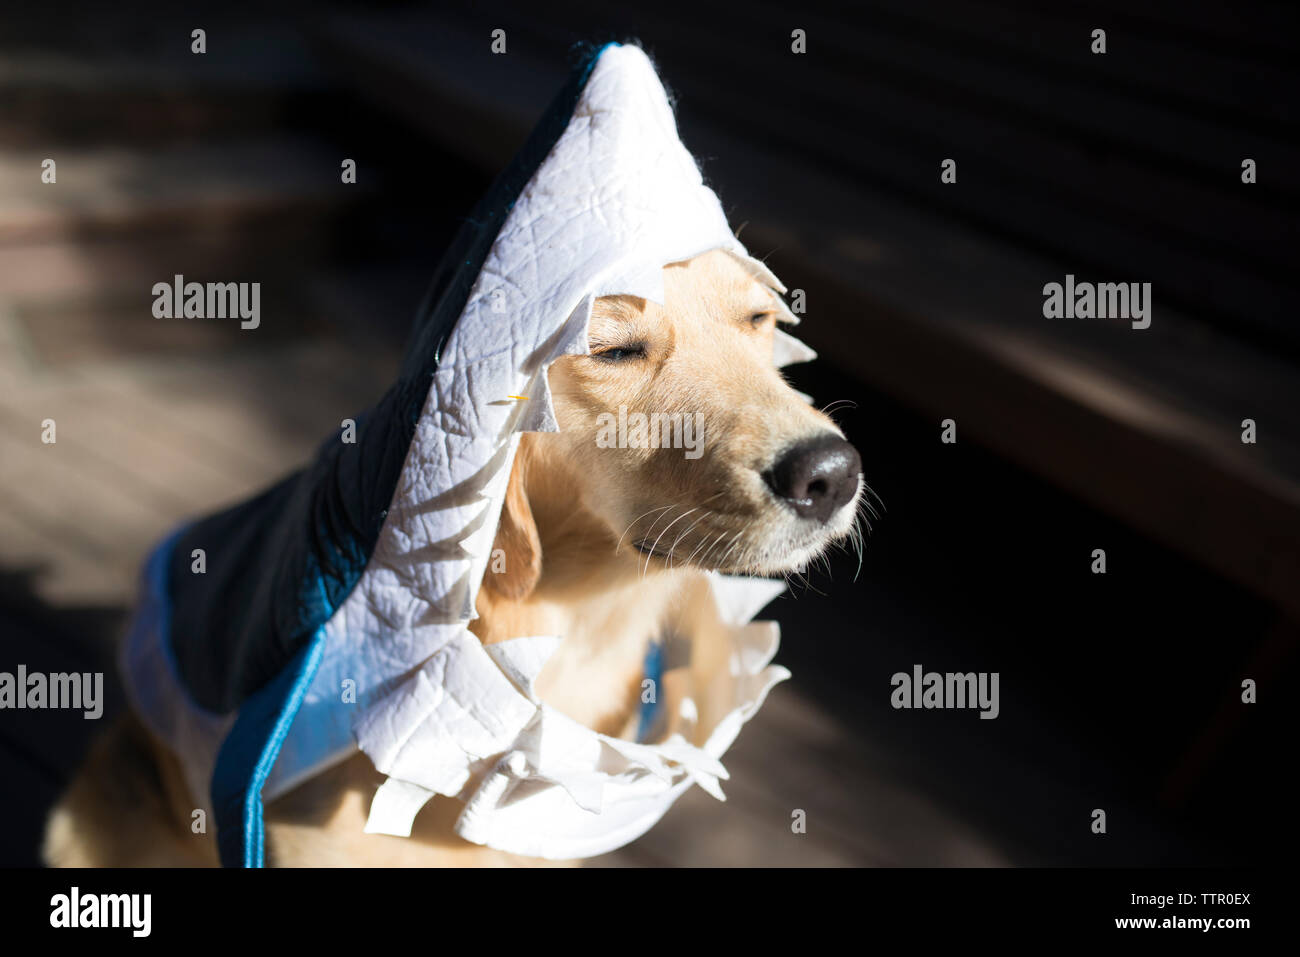 Close-up of dog wearing shark suit standing on floorboard during Halloween Stock Photo